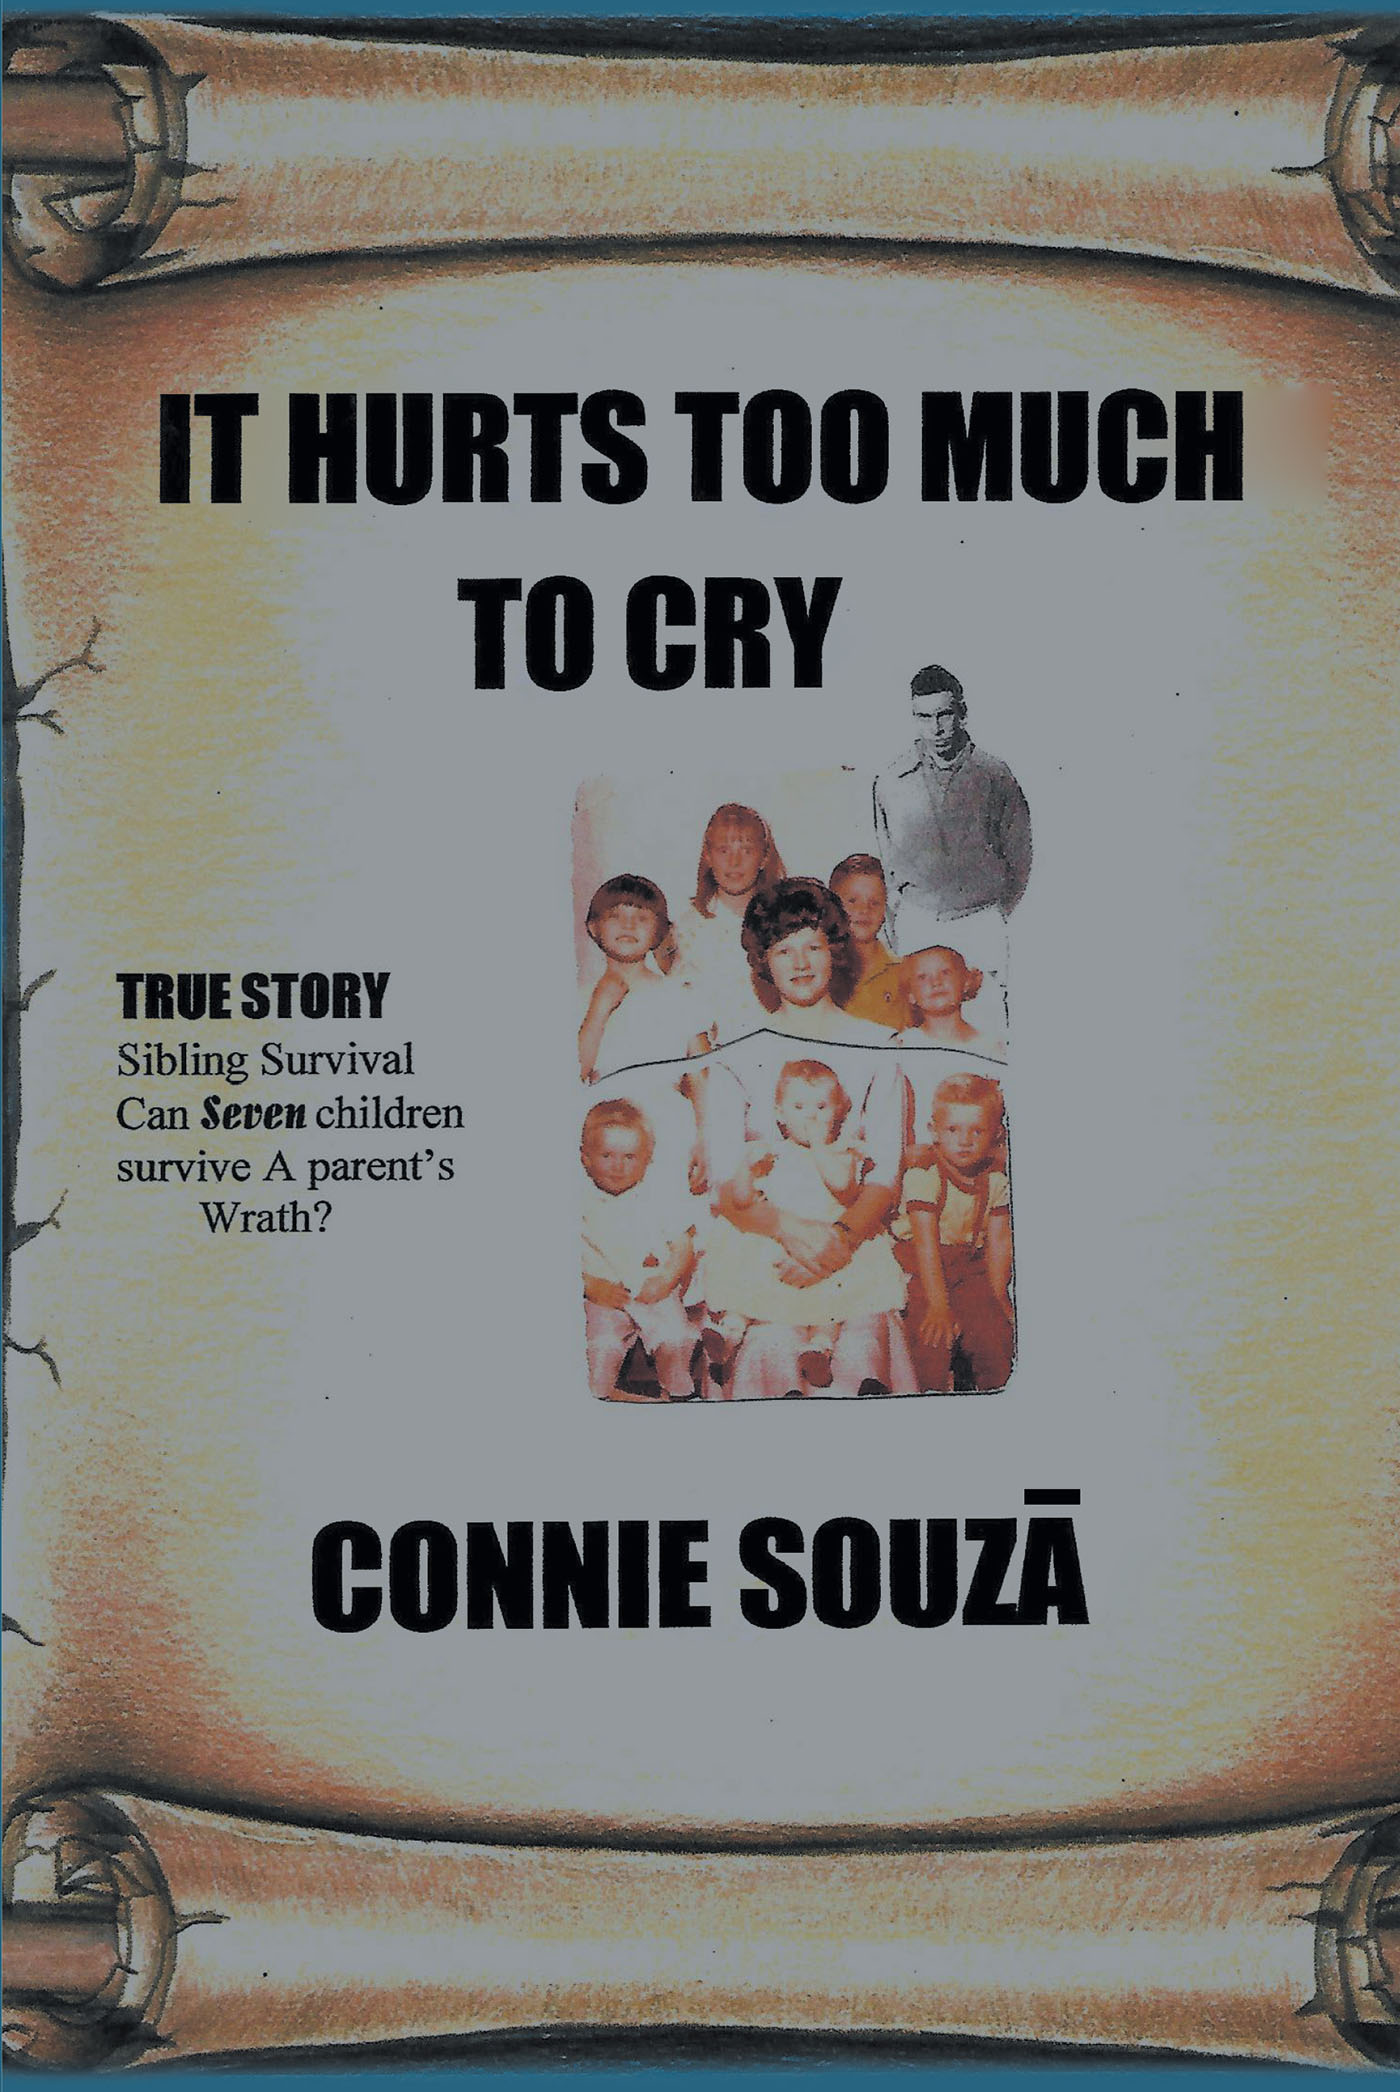 Connie Souzã’s New Book "It Hurts Too Much to Cry" is an Eye-Opening Look at the Suffering and Trauma the Author Experienced During Her Childhood Along with Her Siblings